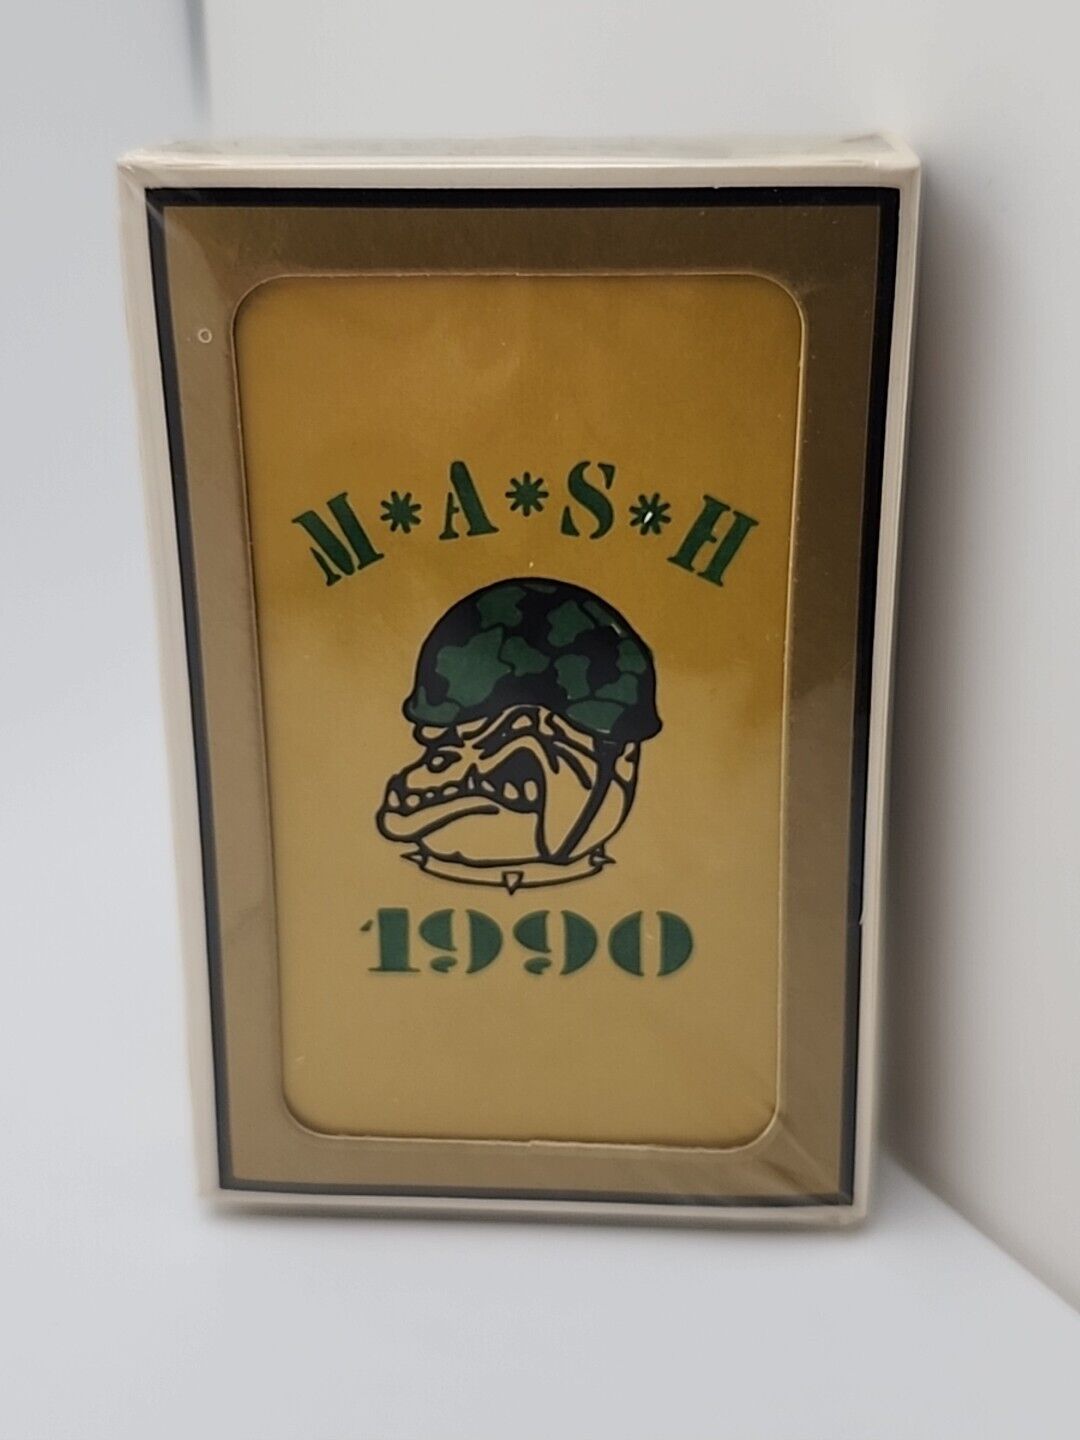 Vintage 1990 Gemaco Deck of Playing Cards MASH - BULLDOG - NEW OLD STOCK SEALED